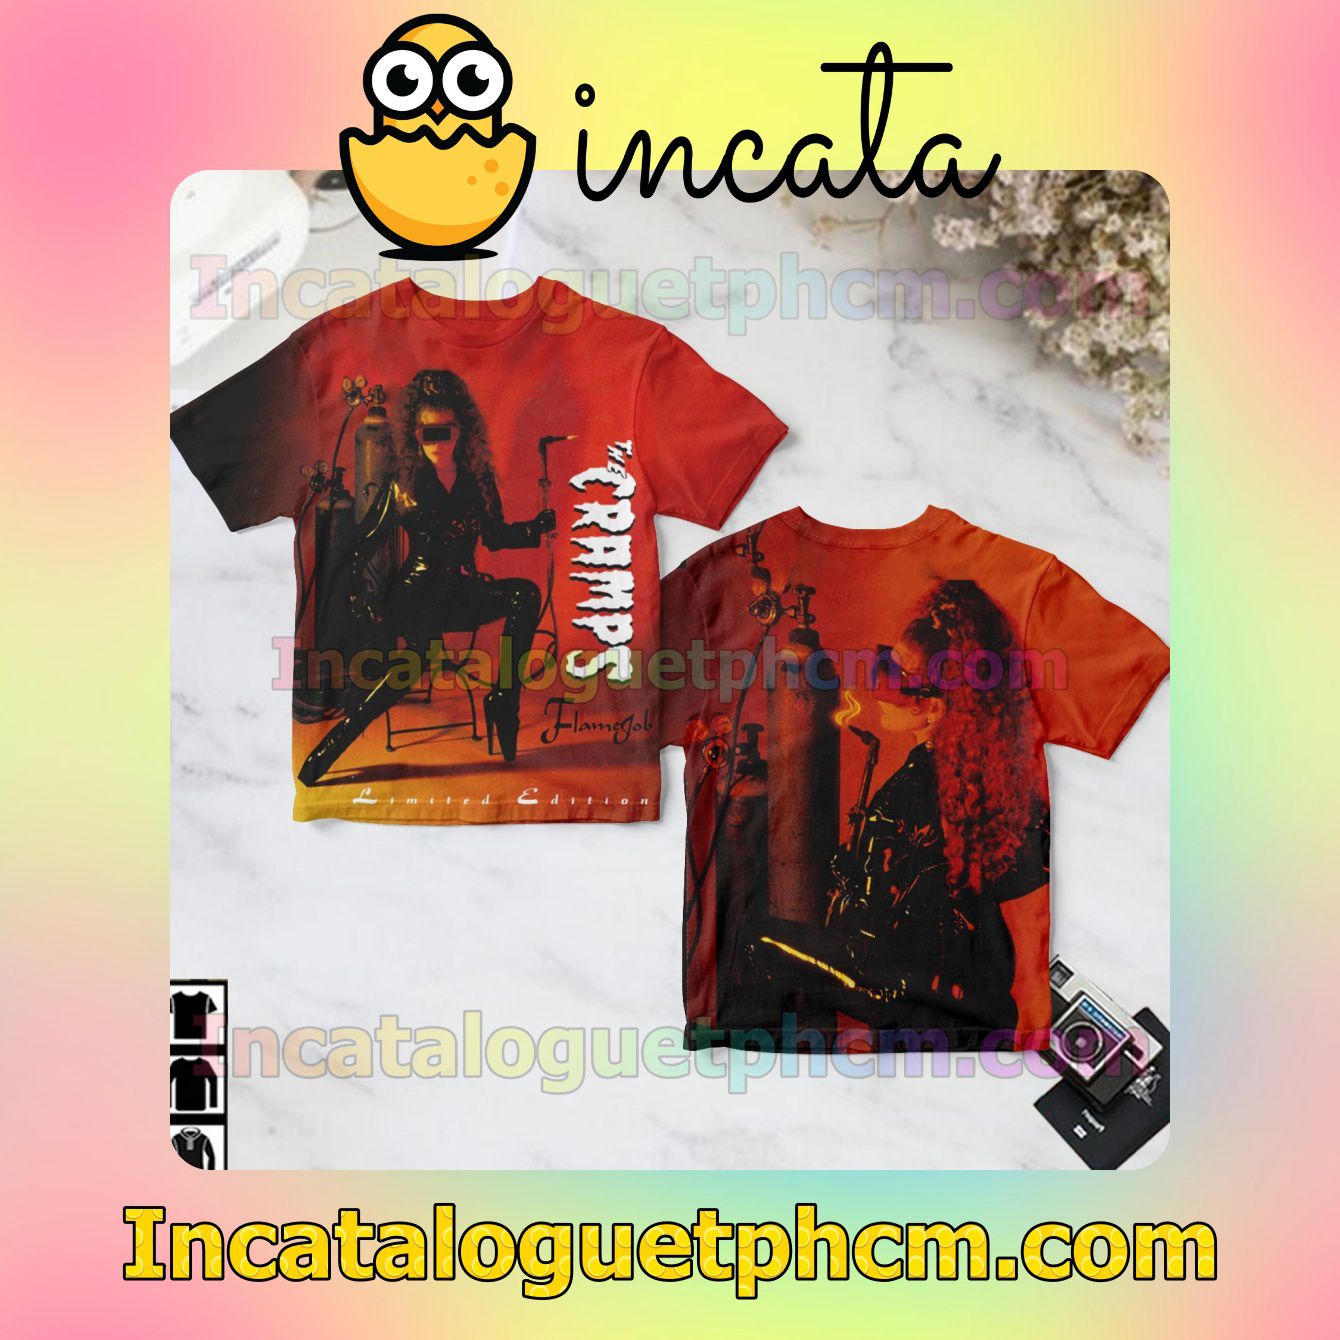 The Cramps Flamejob Album Cover Red Gift Shirt